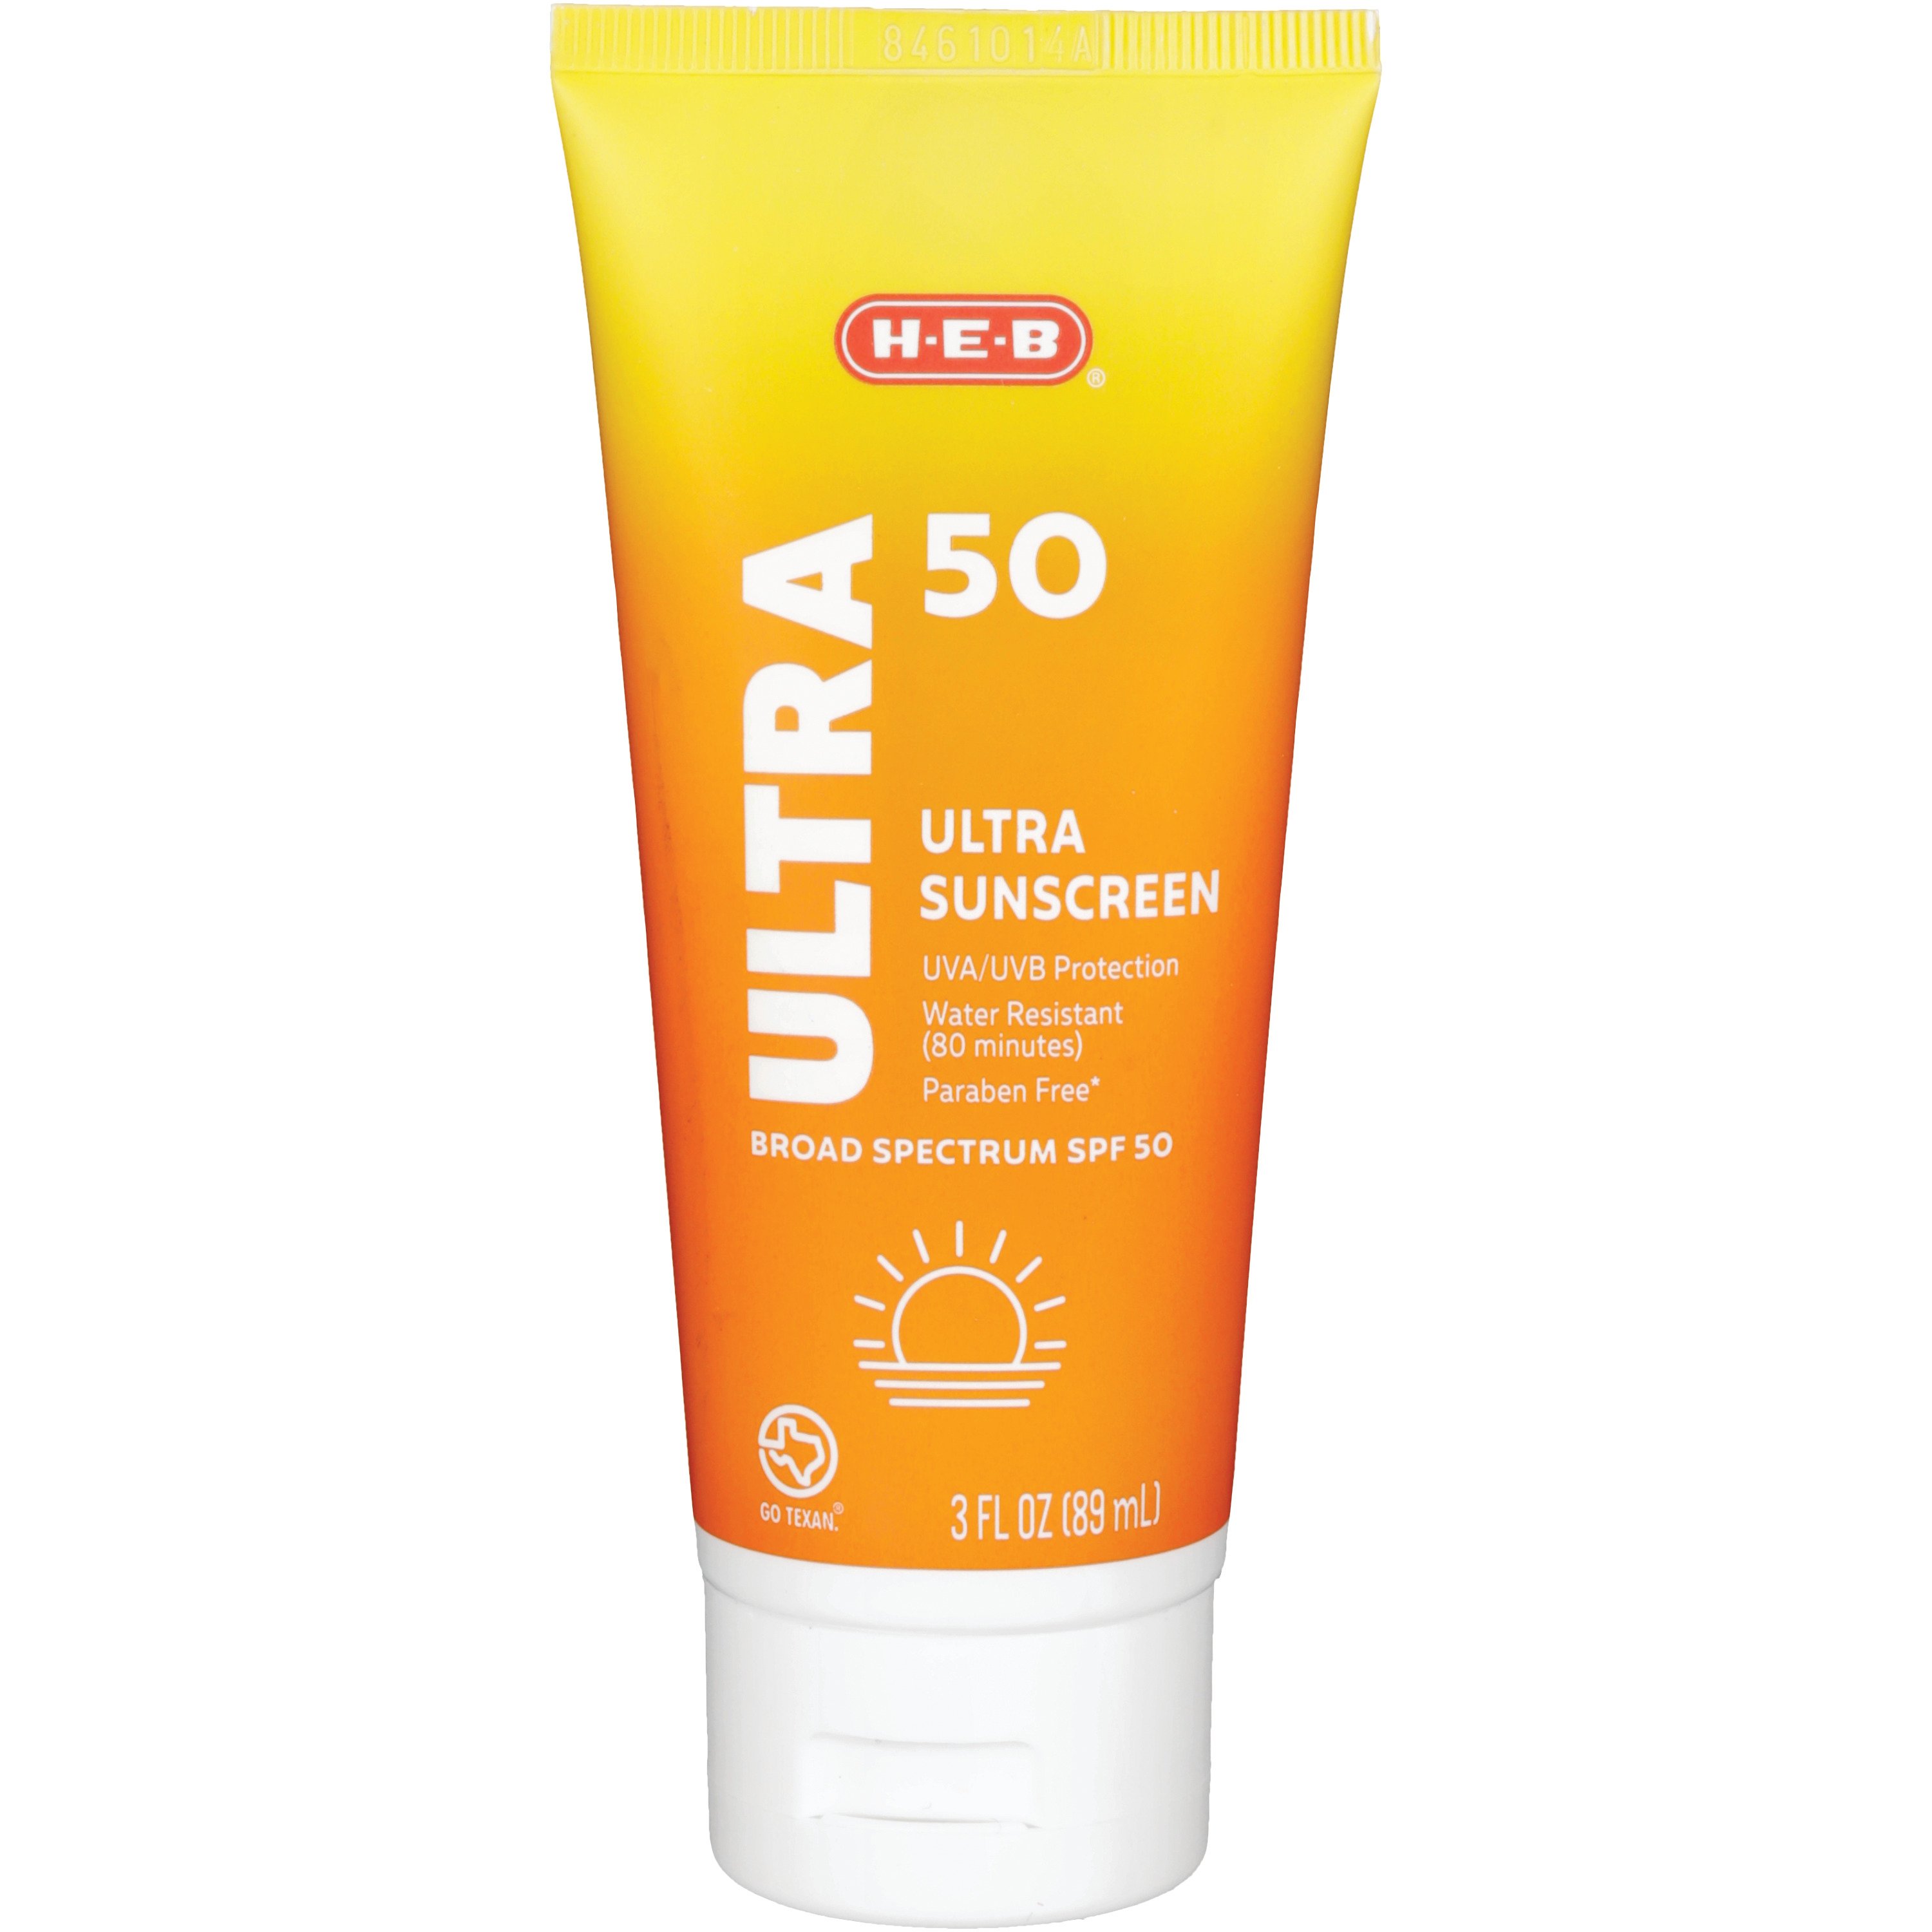 H-E-B Mineral Protection Broad Spectrum Sunscreen Stick – SPF 50